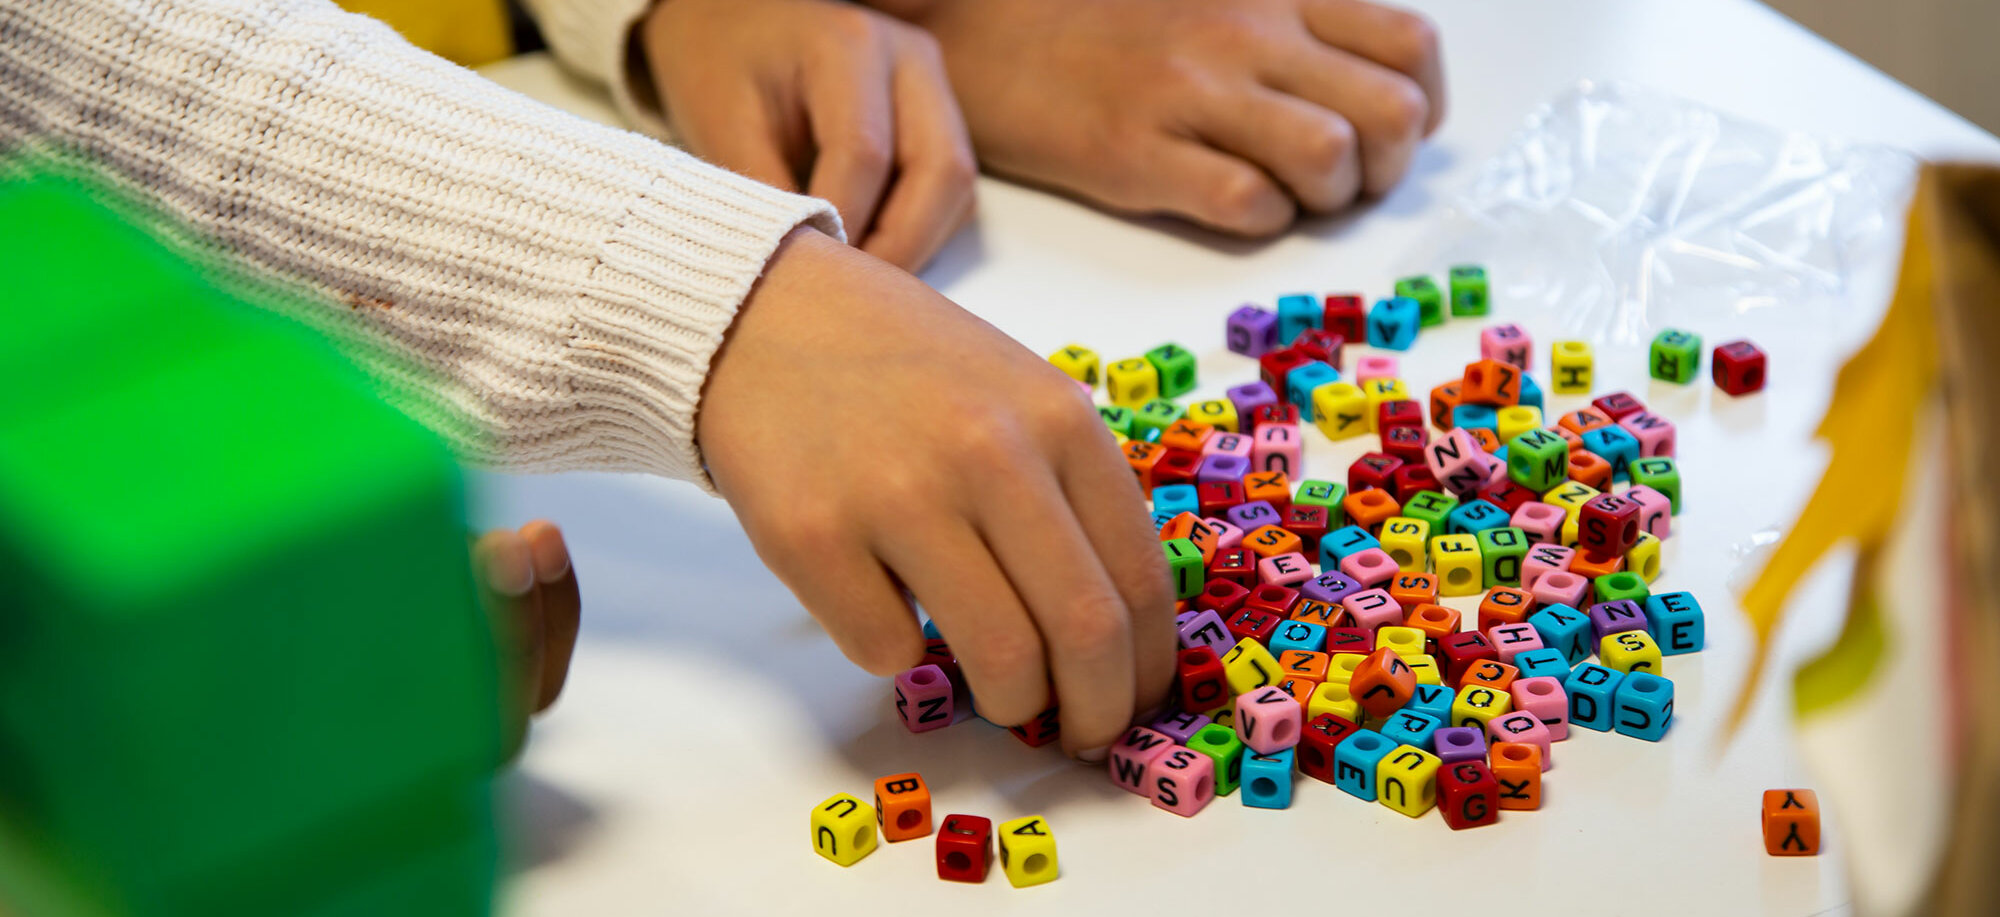 Close-up of three children's hands on a table. One hand reaches into a small pile of colourful letter beads.